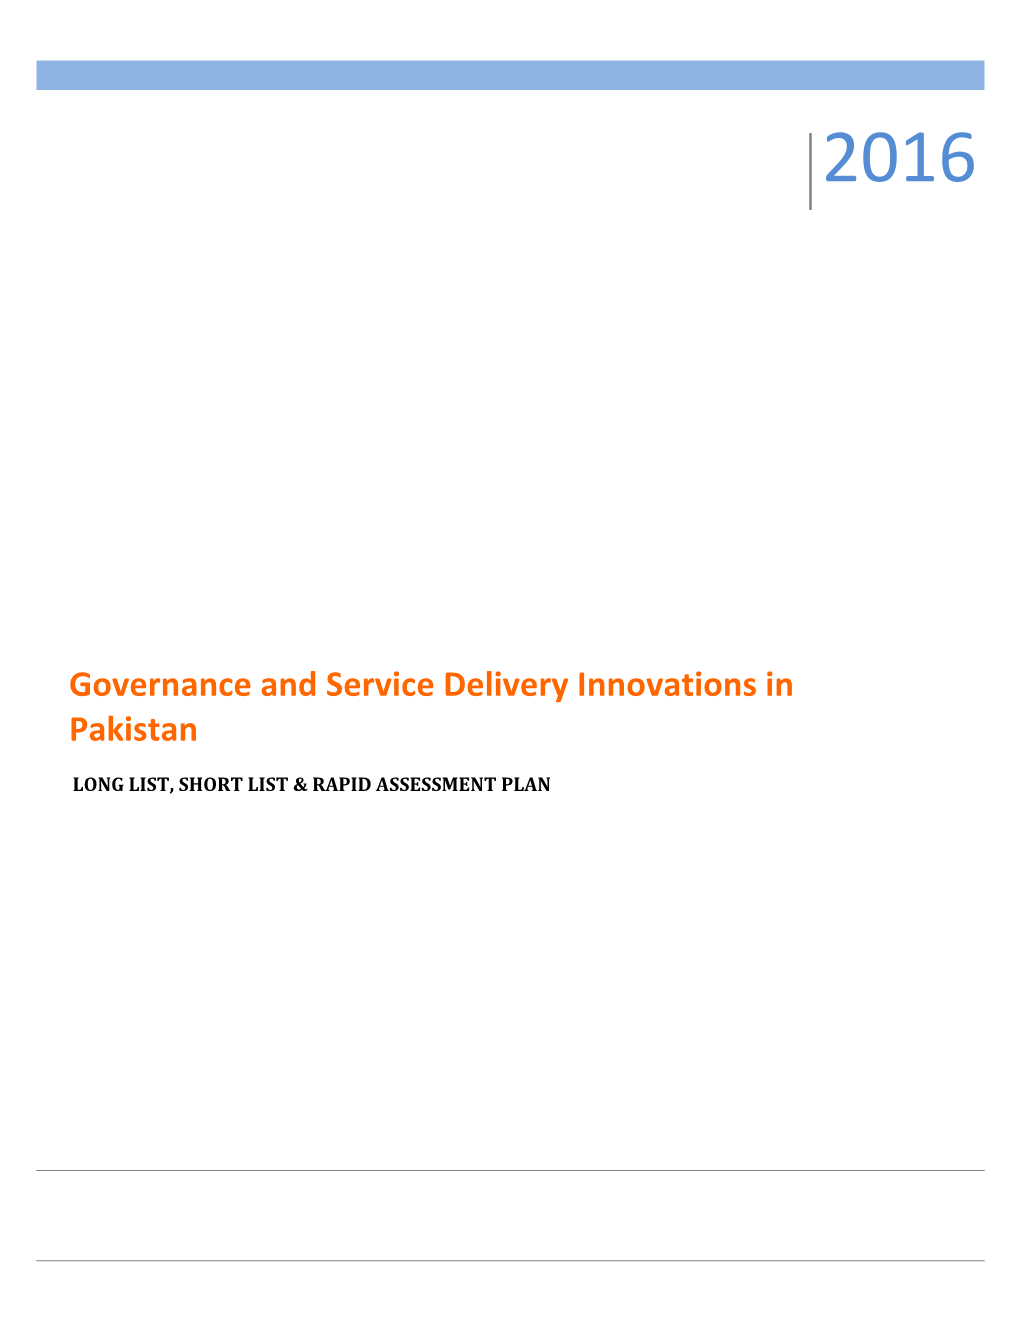 Governance and Service Delivery Innovations in Pakistan